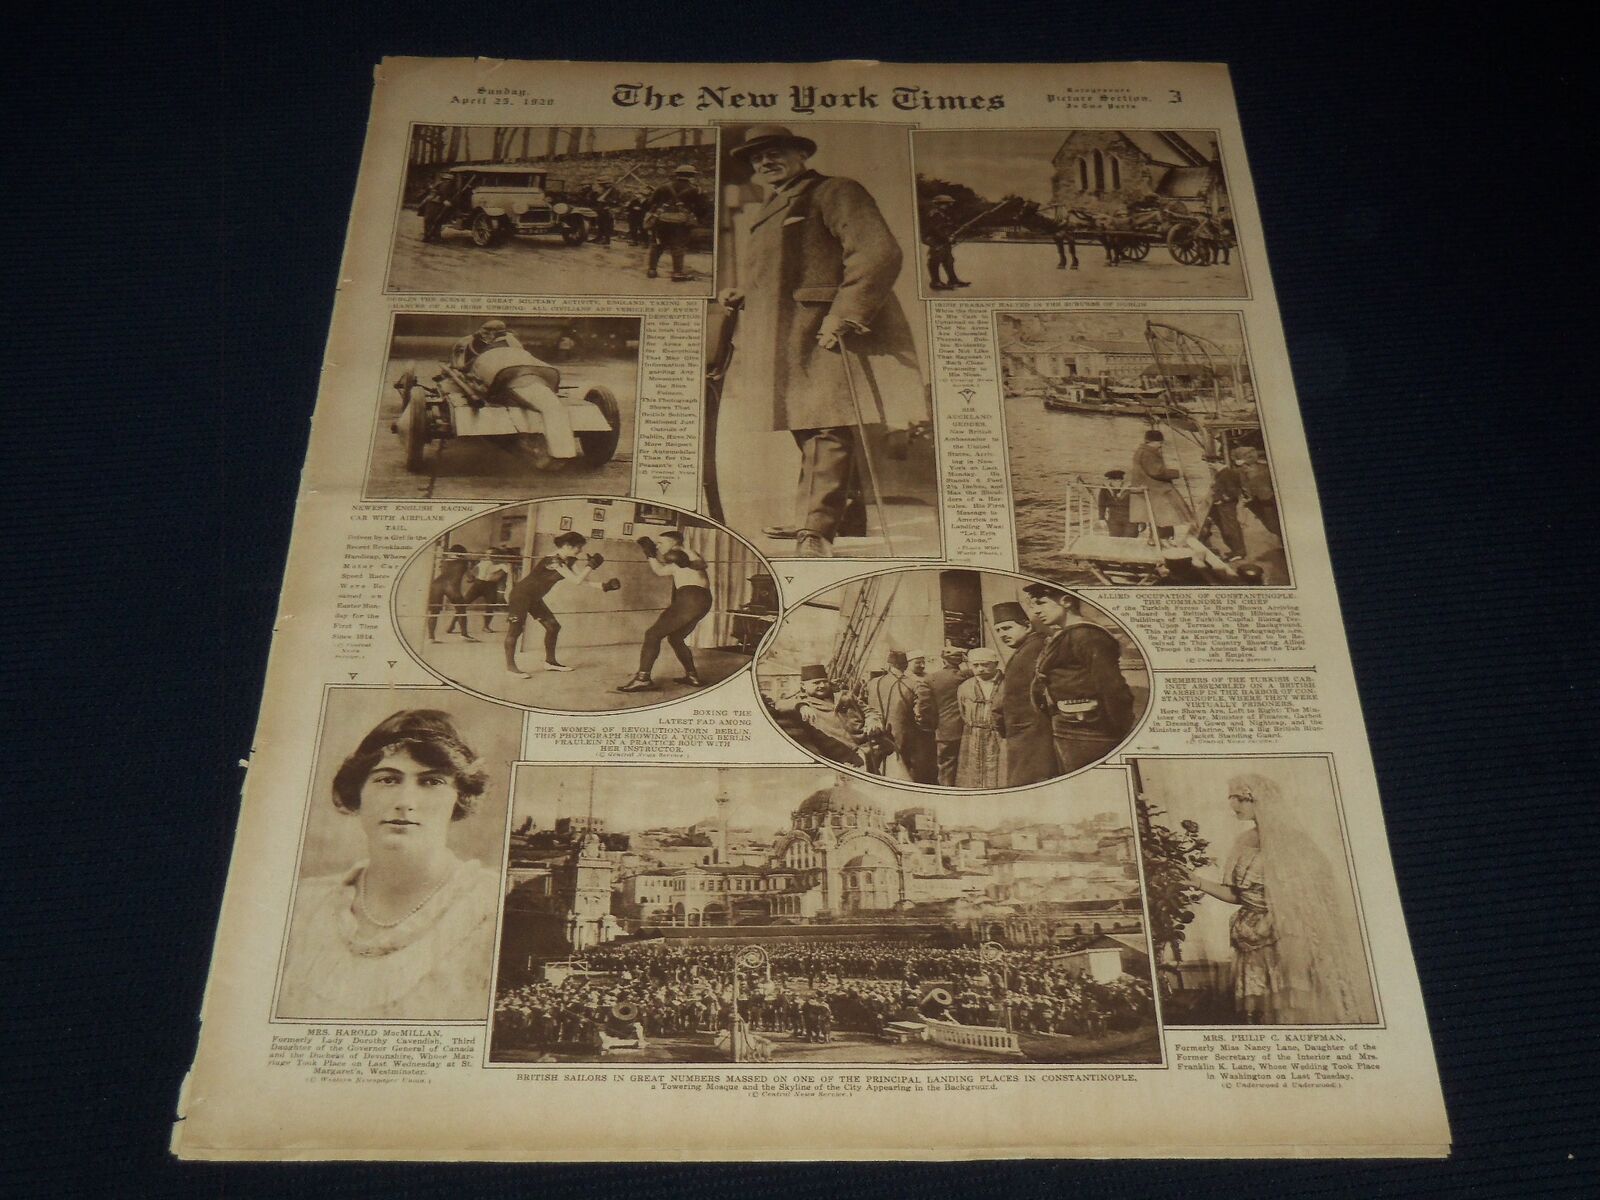 1920 APRIL 25 NEW YORK TIMES PICTURE SECTION - DUBLIN IRELAND - NT 9505